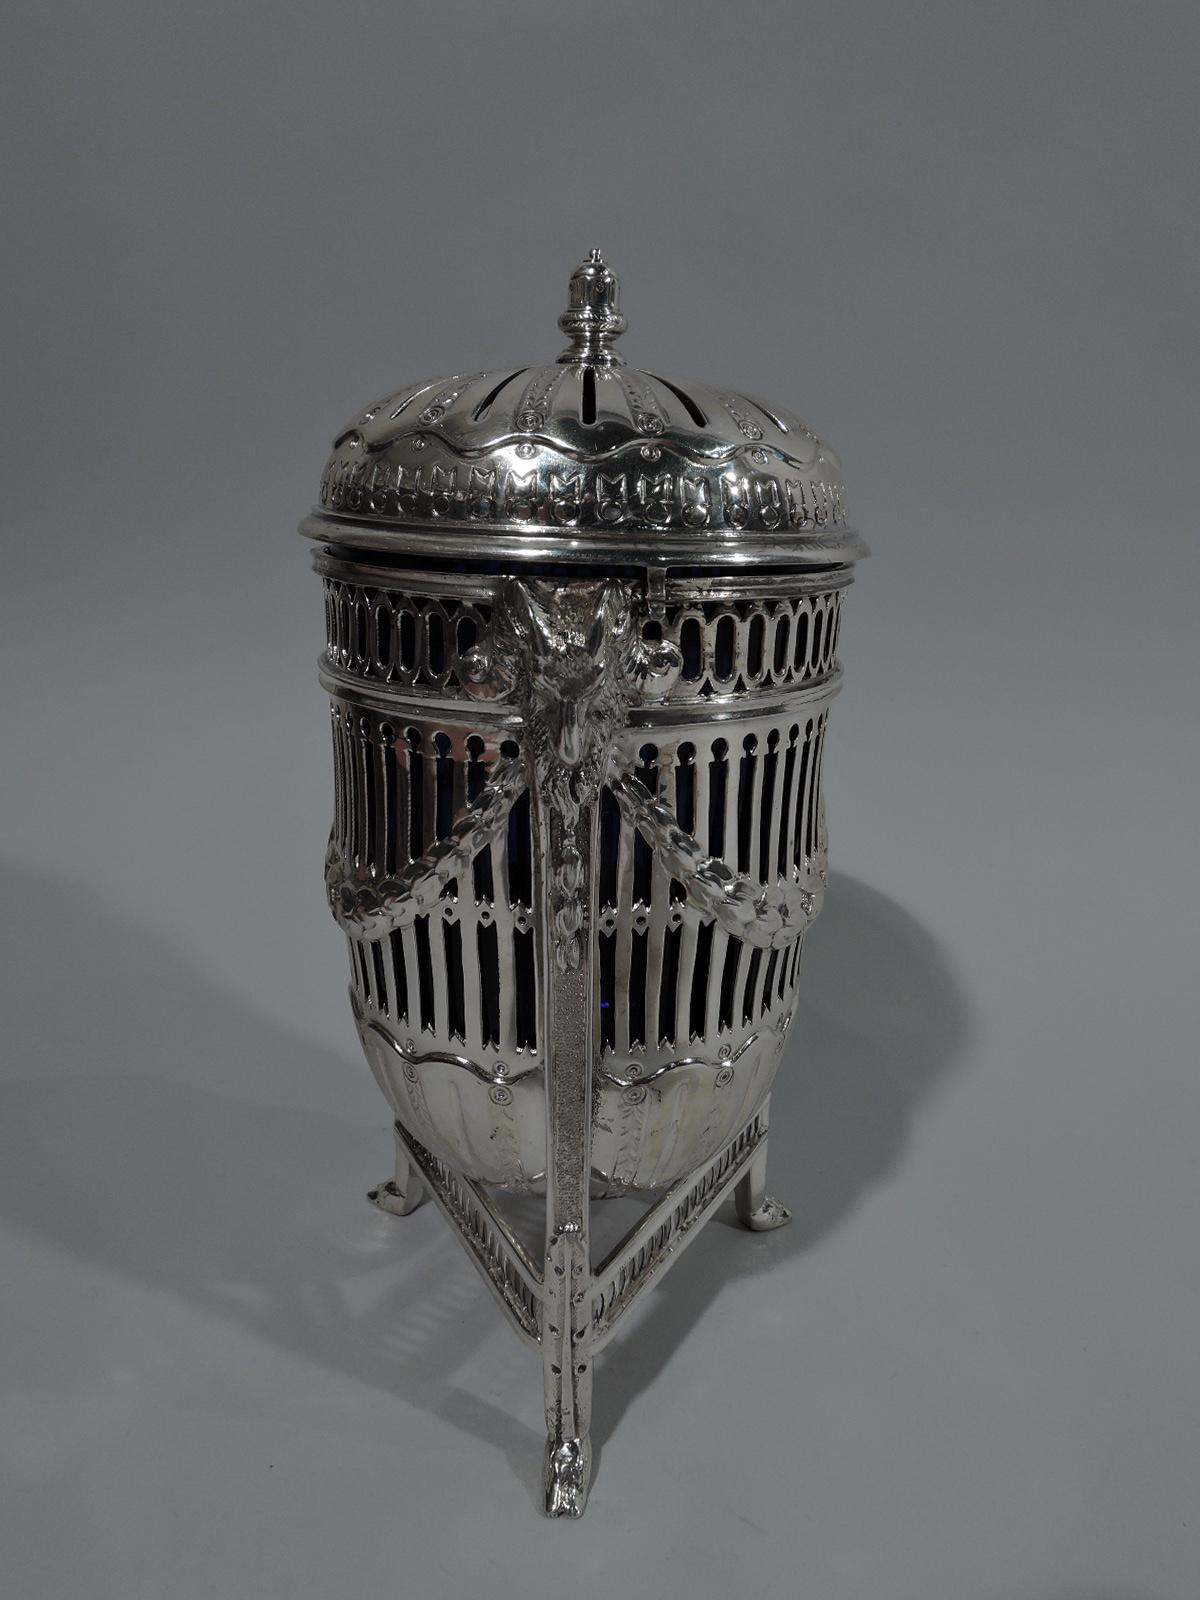 Edwardian Neoclassical sterling silver potpourri. Made by George Nathan & Ridley Hayes in Chester in 1904. Ovoid urn in tripod frame with ram’s head monopodium supports and pierced stretchers. Pierced sides and base fluting. Cover domed and pierced